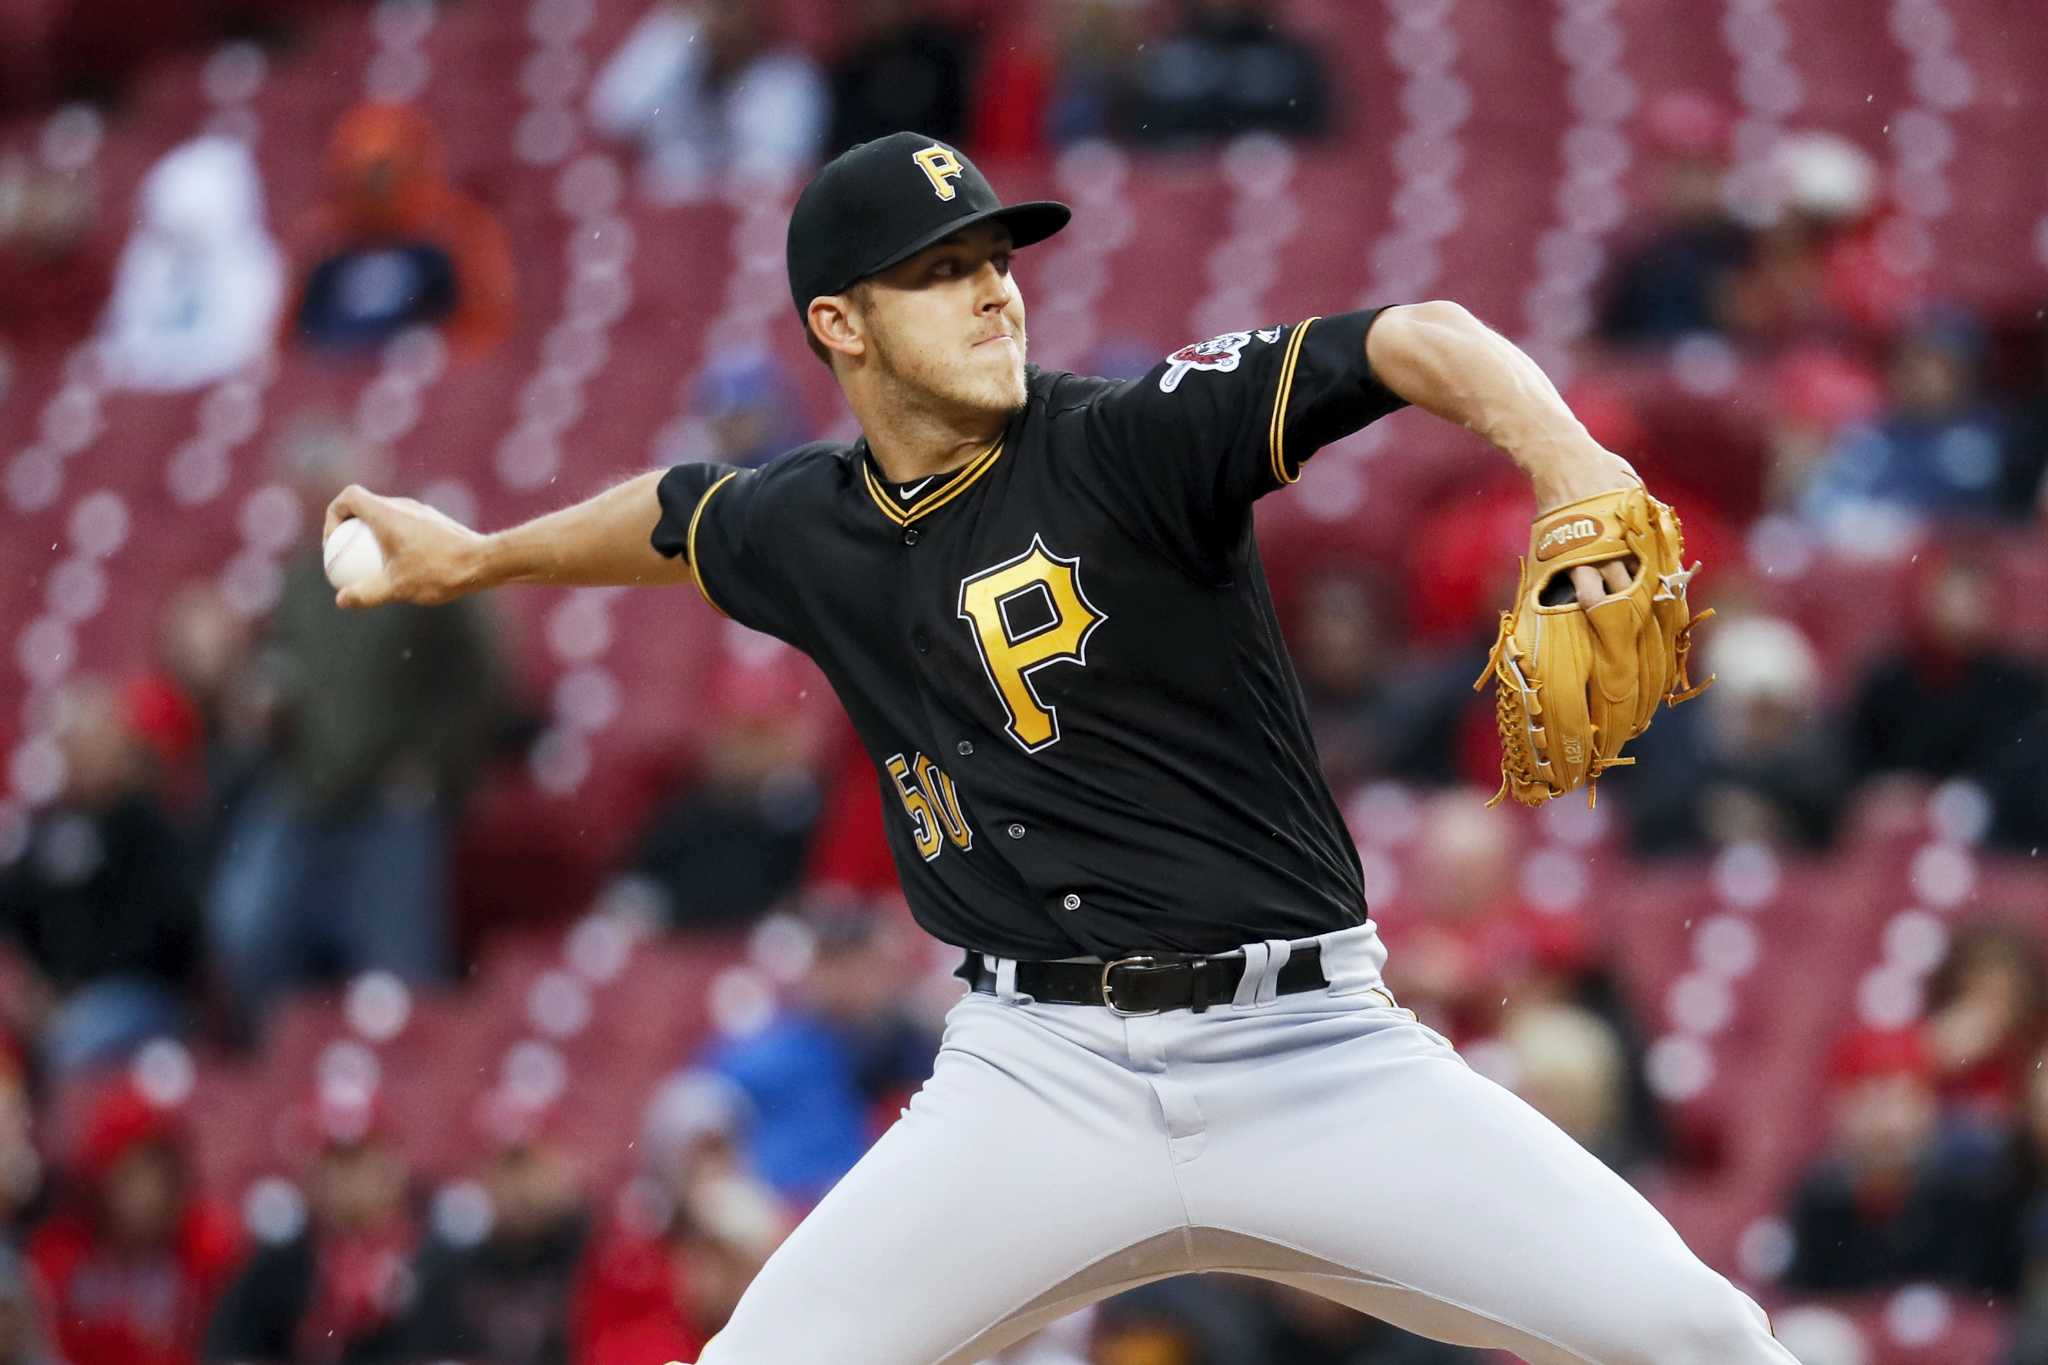 MLB: The Woodlands grad, Pirates pitcher Taillon has suspected